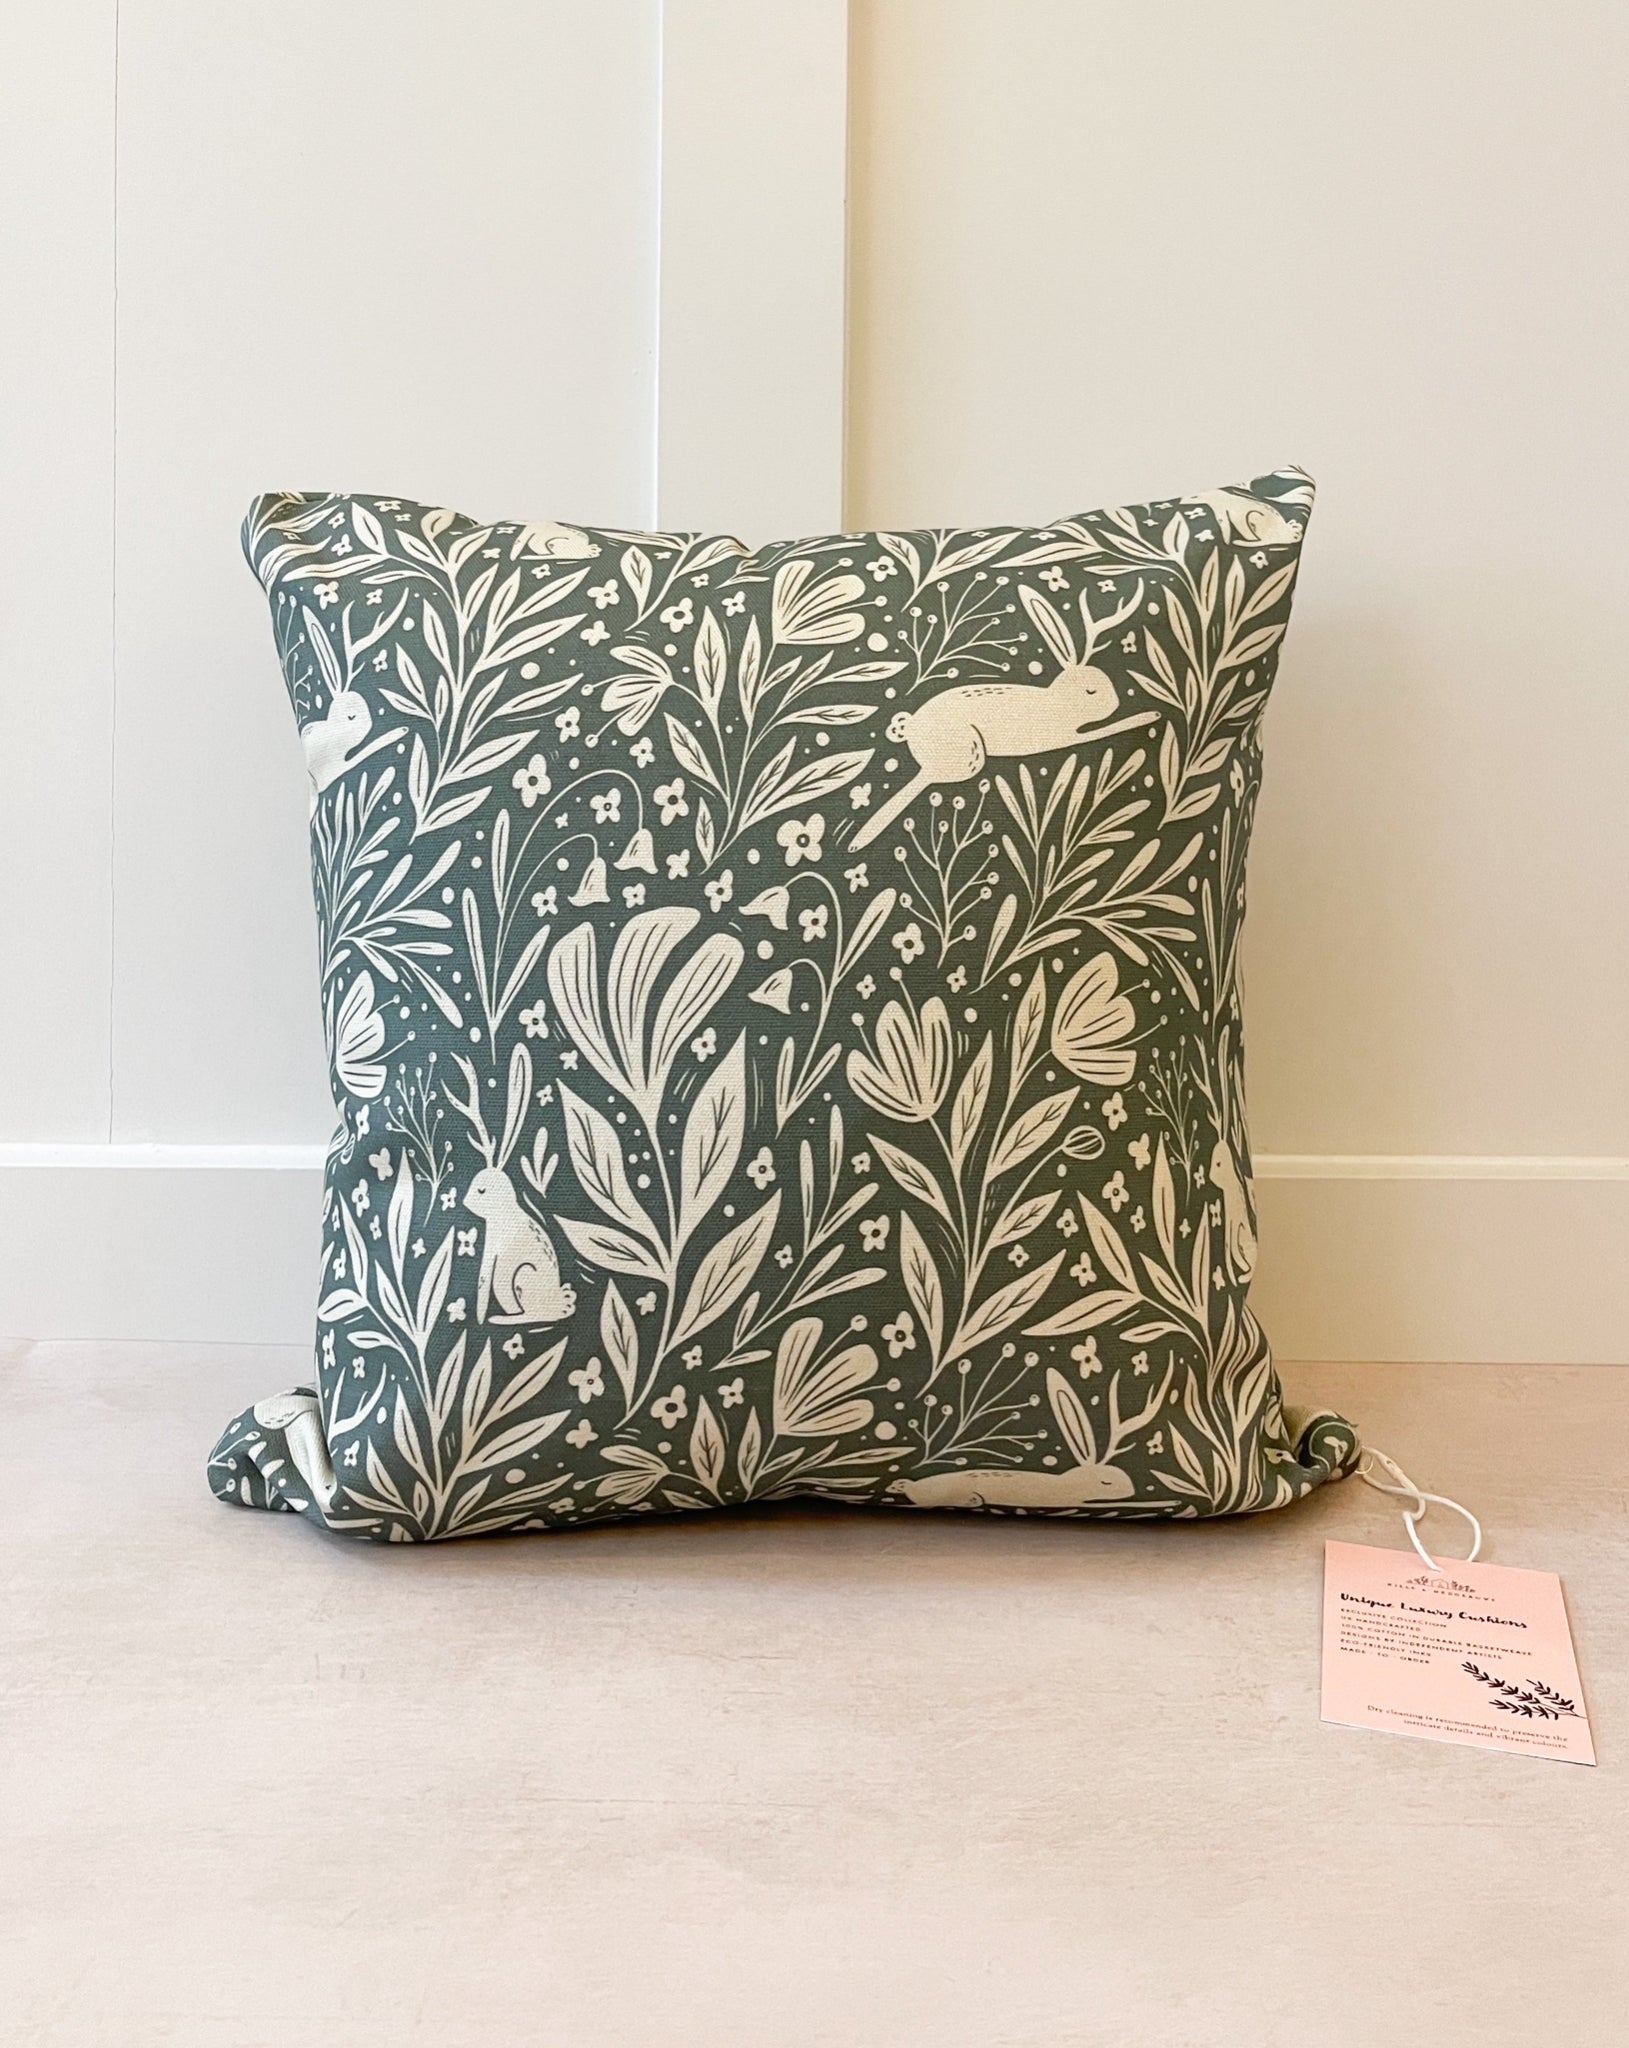 Botanical-inspired decorative cushion with lush green and floral patterns, handmade in the UK from sustainable basketweave cotton.